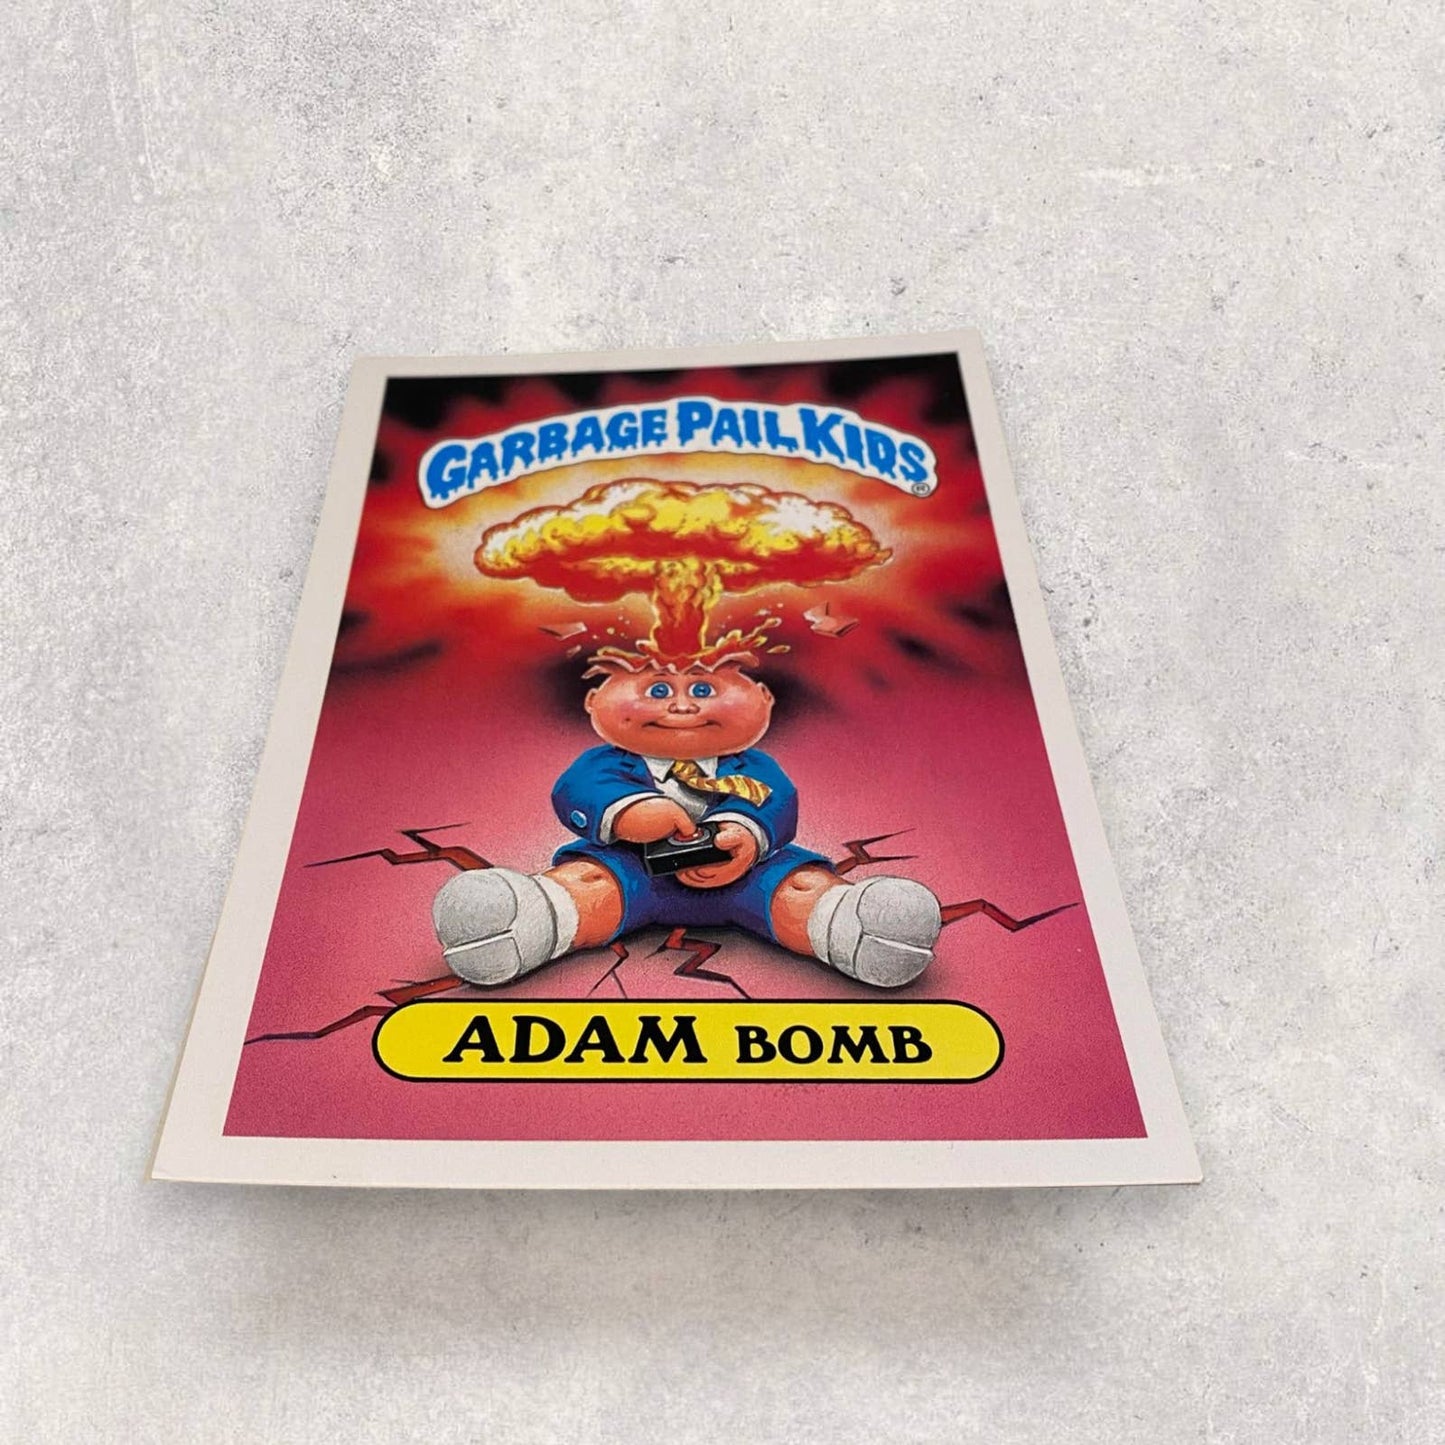 Garbage Pail Giant "Adam Bomb" Card - Midnight Relics